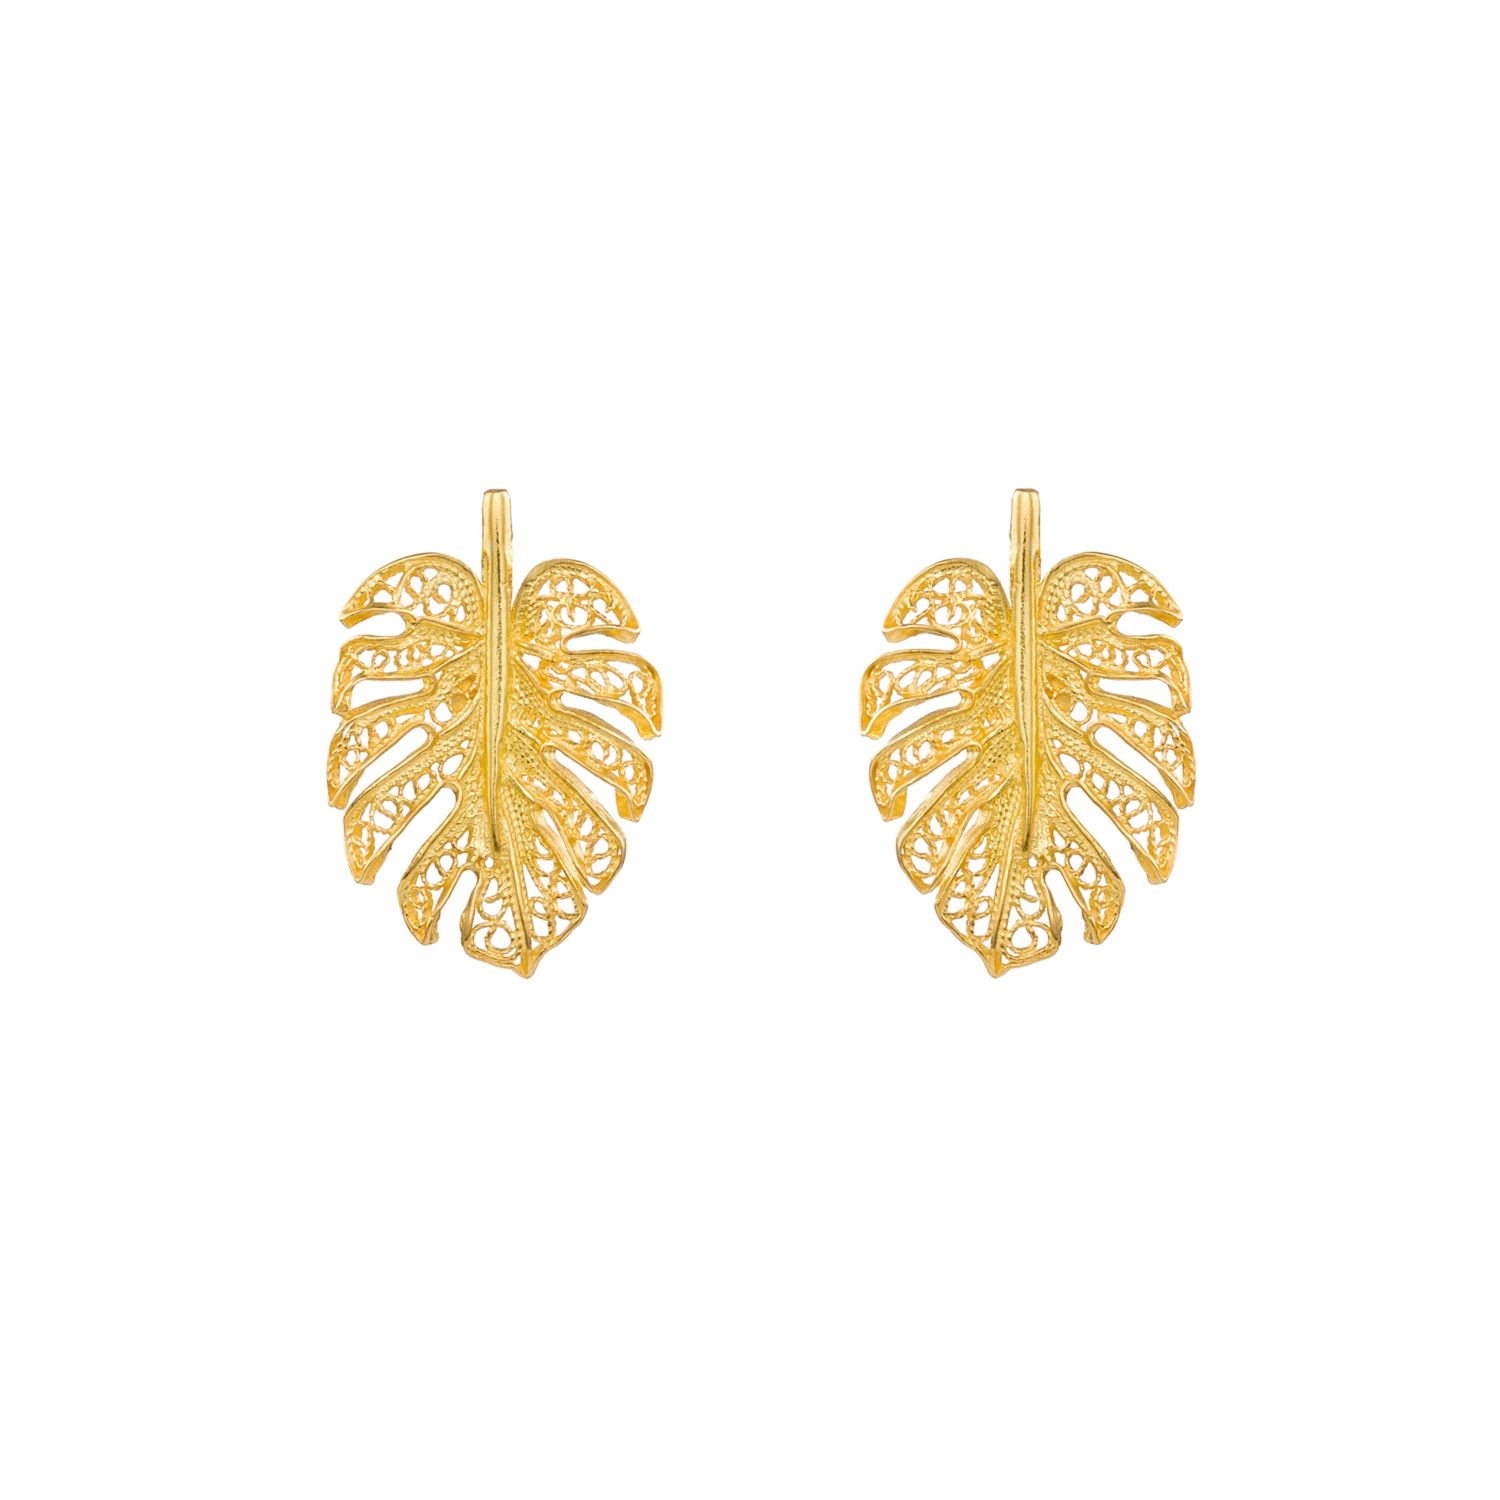 Earrings Monstera in Gold Plated Silver - Portugal Jewels